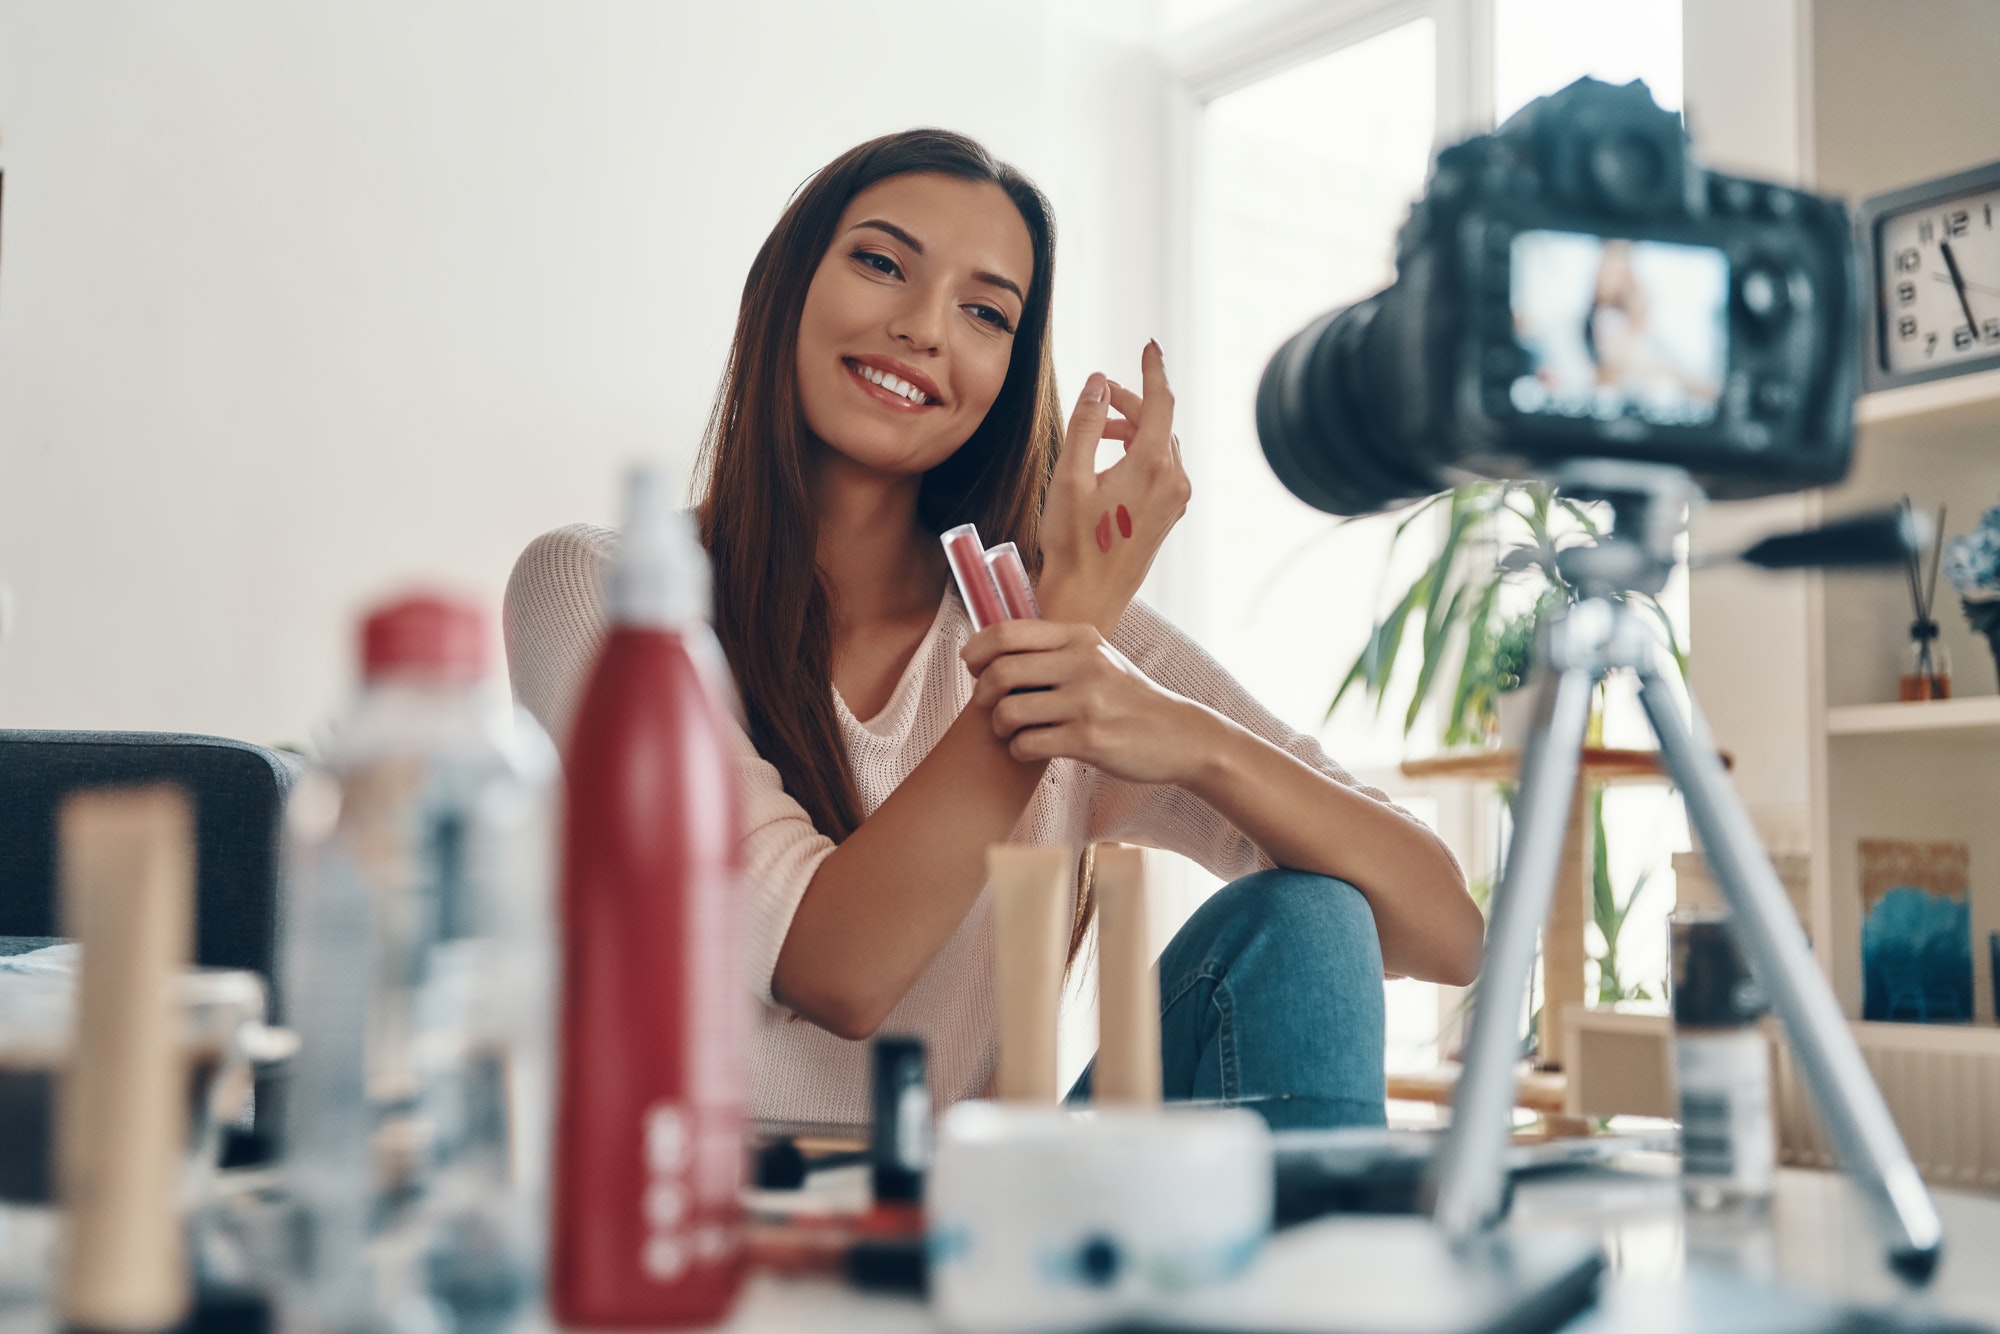 Stunning young woman applying lip gloss and smiling while making social media video